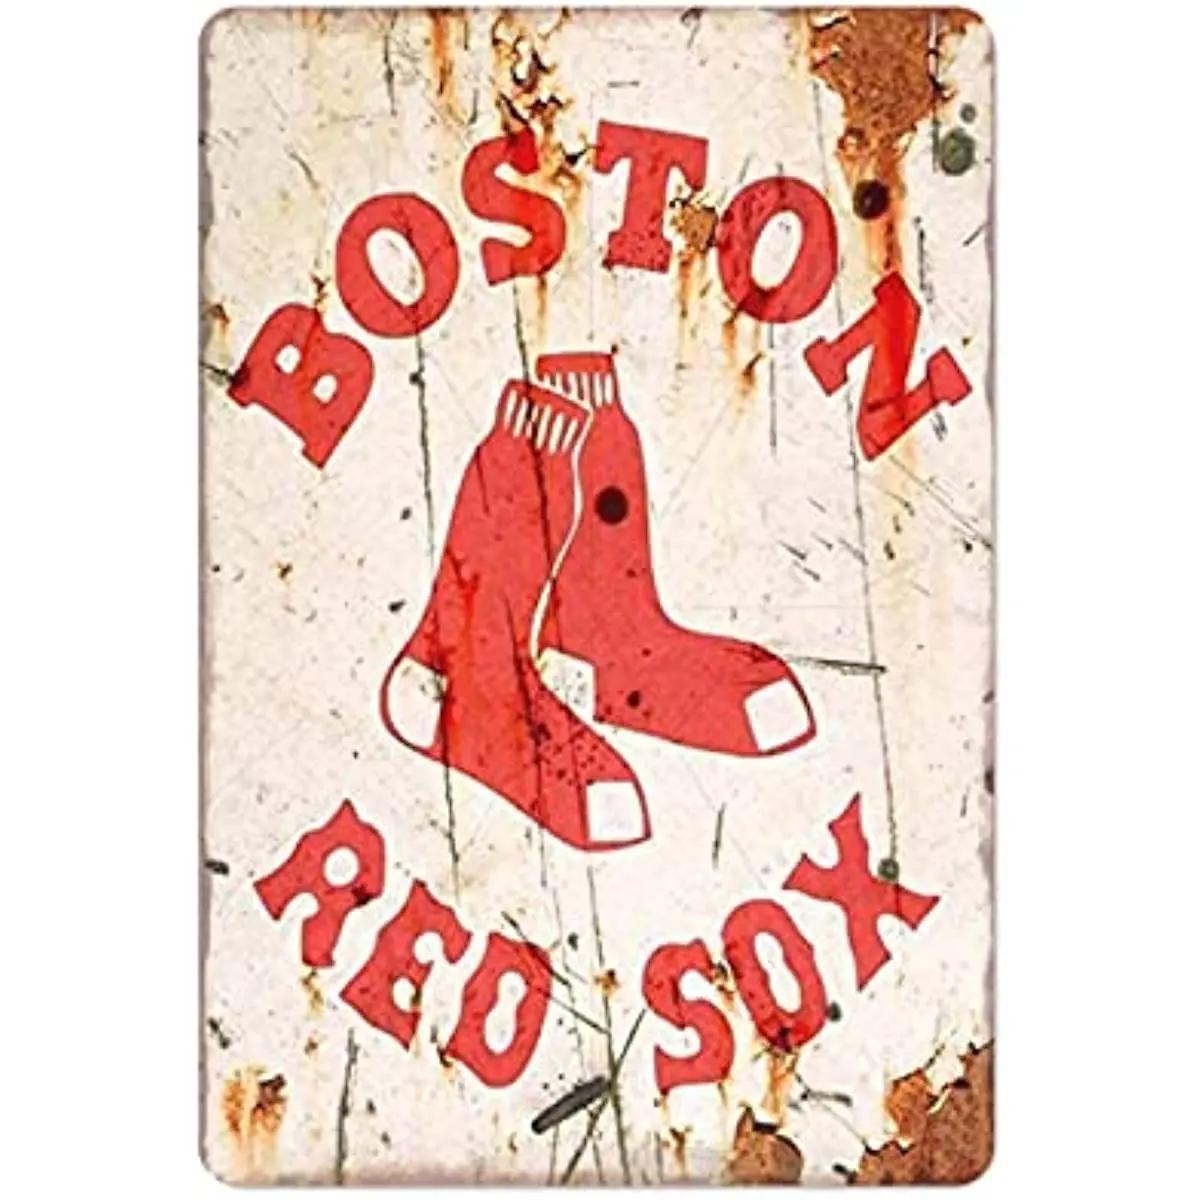 

New Metal Tin Sign Vintage Boston Red Rust Fenway Card for Home Living Room Garden Office Hotel Cafe and Pub Wall Decor